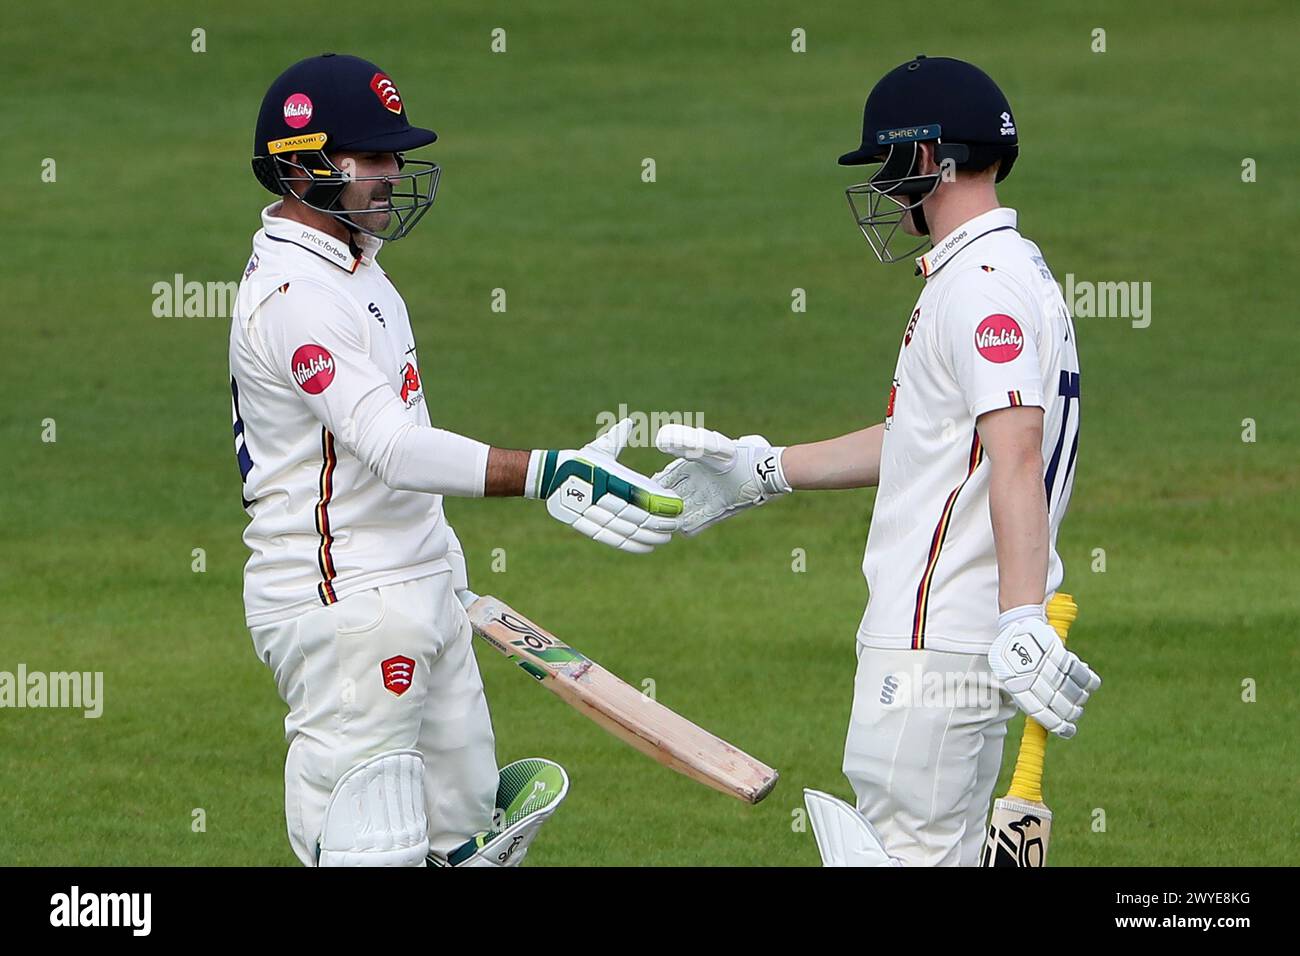 Jordan Cox of Essex congratulates Dean Elgar (L) on reaching his fifty during Nottinghamshire CCC vs Essex CCC, Vitality County Championship Division Stock Photo